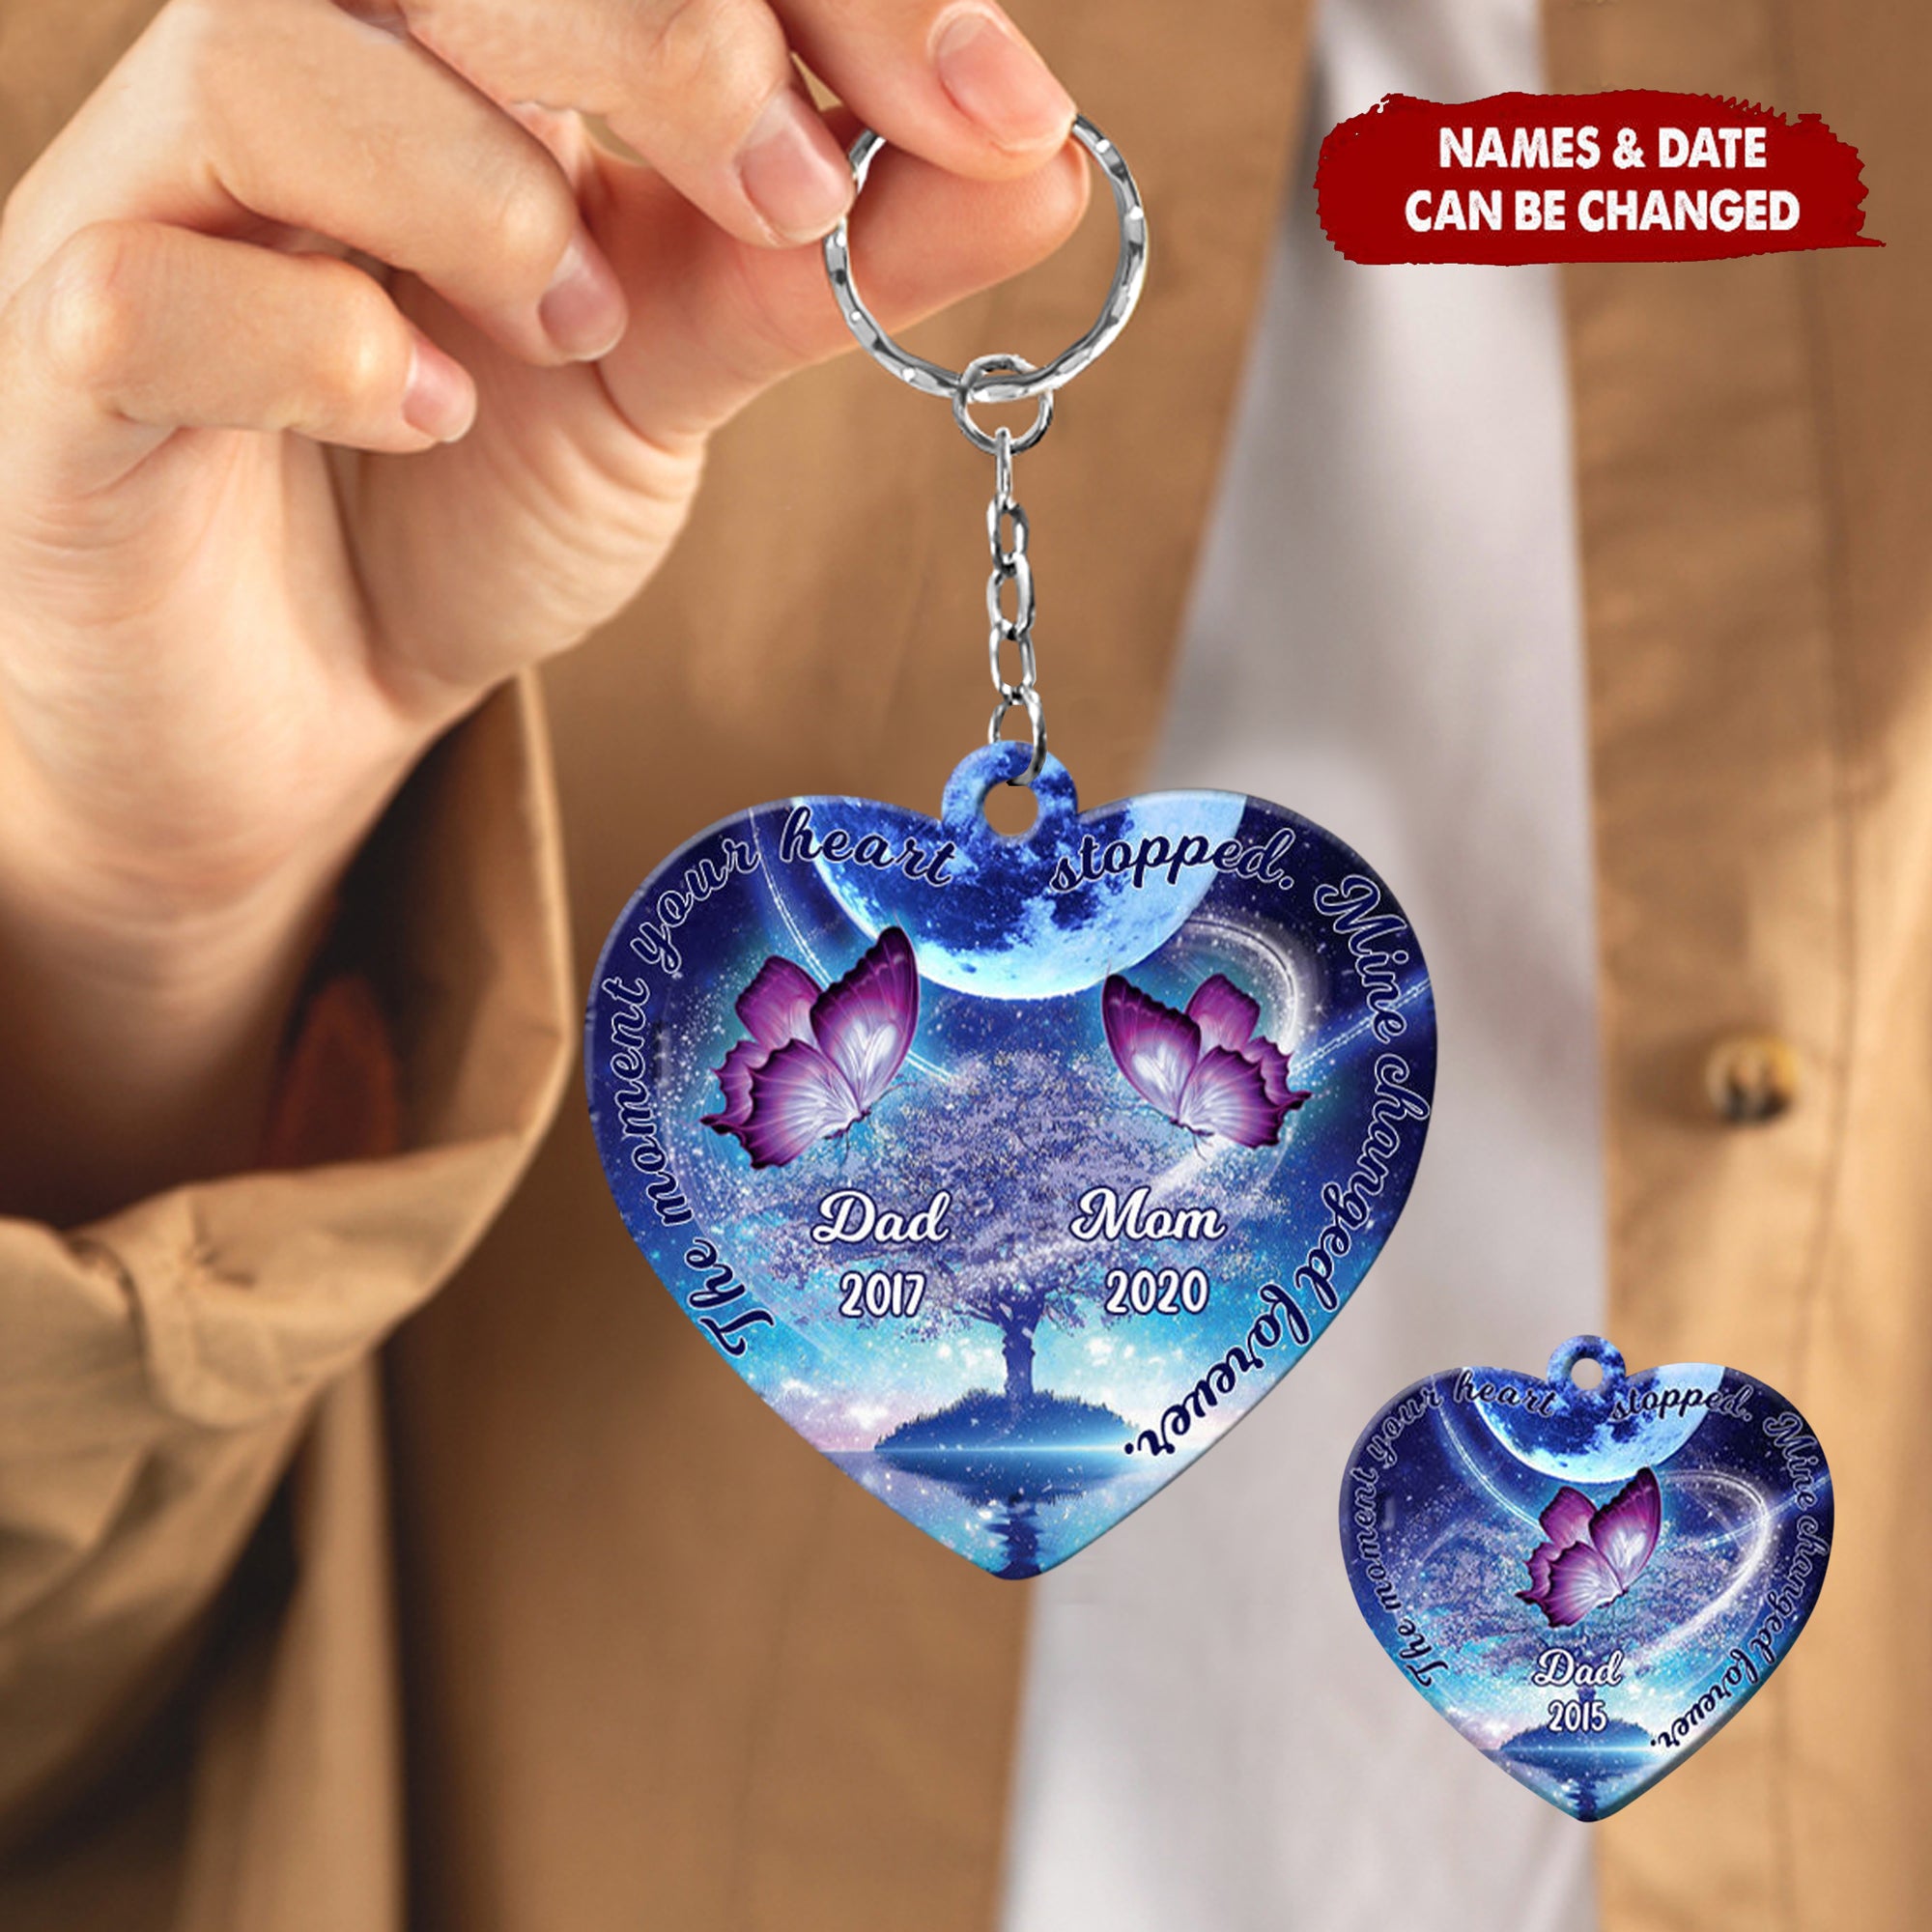 The Moment Your Heart Stopped, Mine Changed Forever Custom Memorial Acrylic Keychain